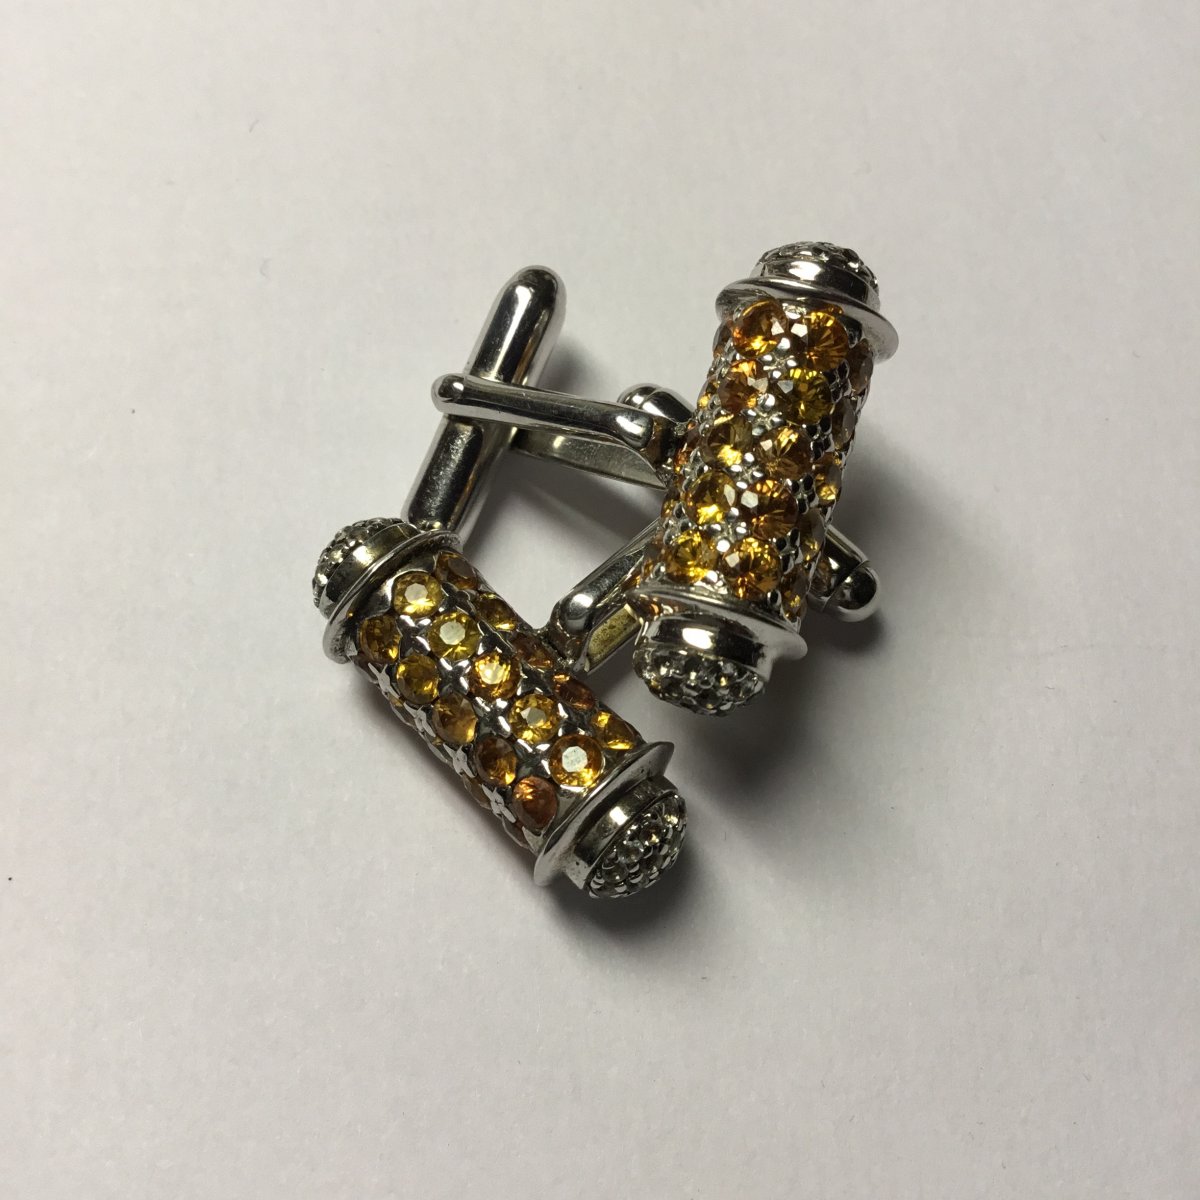 Pair Of Cufflinks, Silver, Sapphires And Diamonds